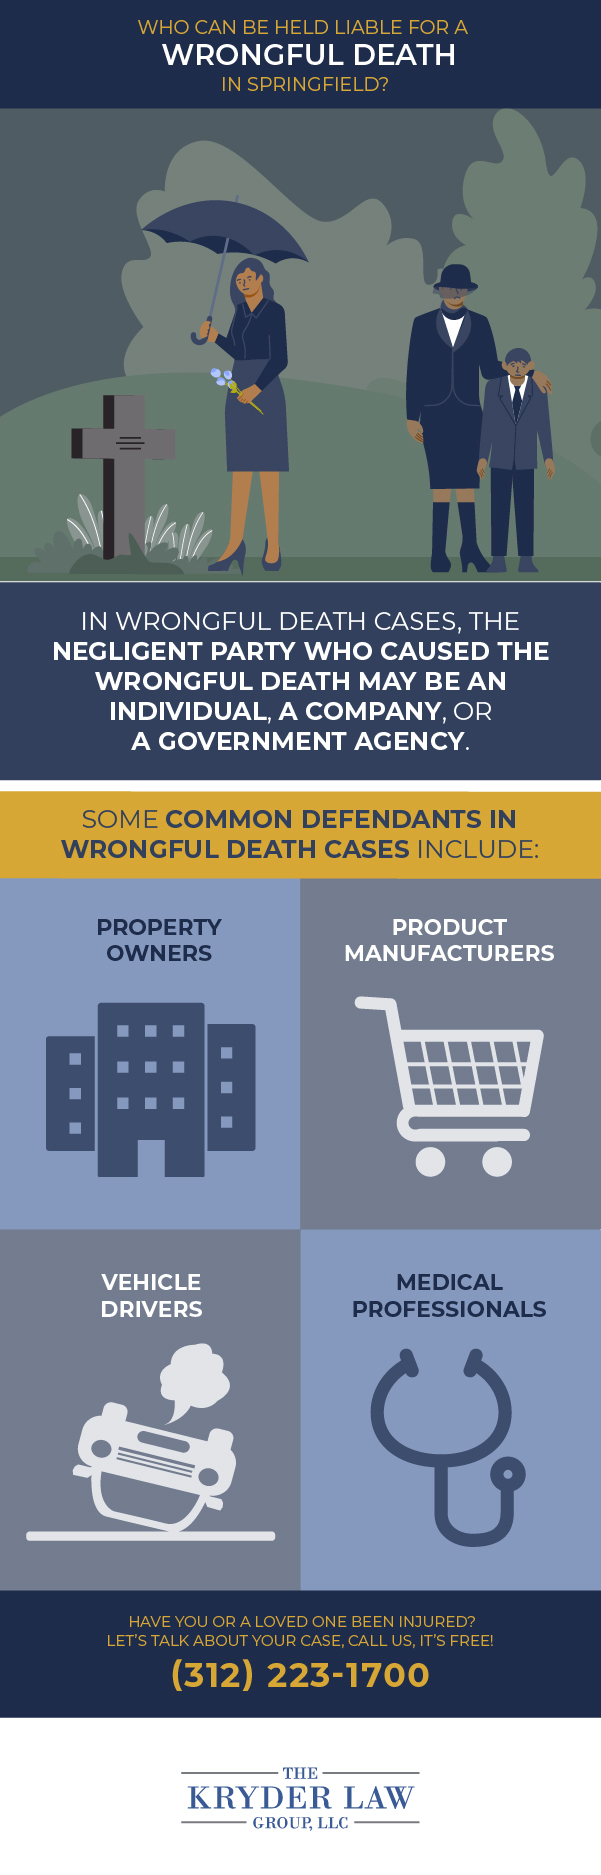 Who Can Be Held Liable for a Wrongful Death in Springfield Infographic